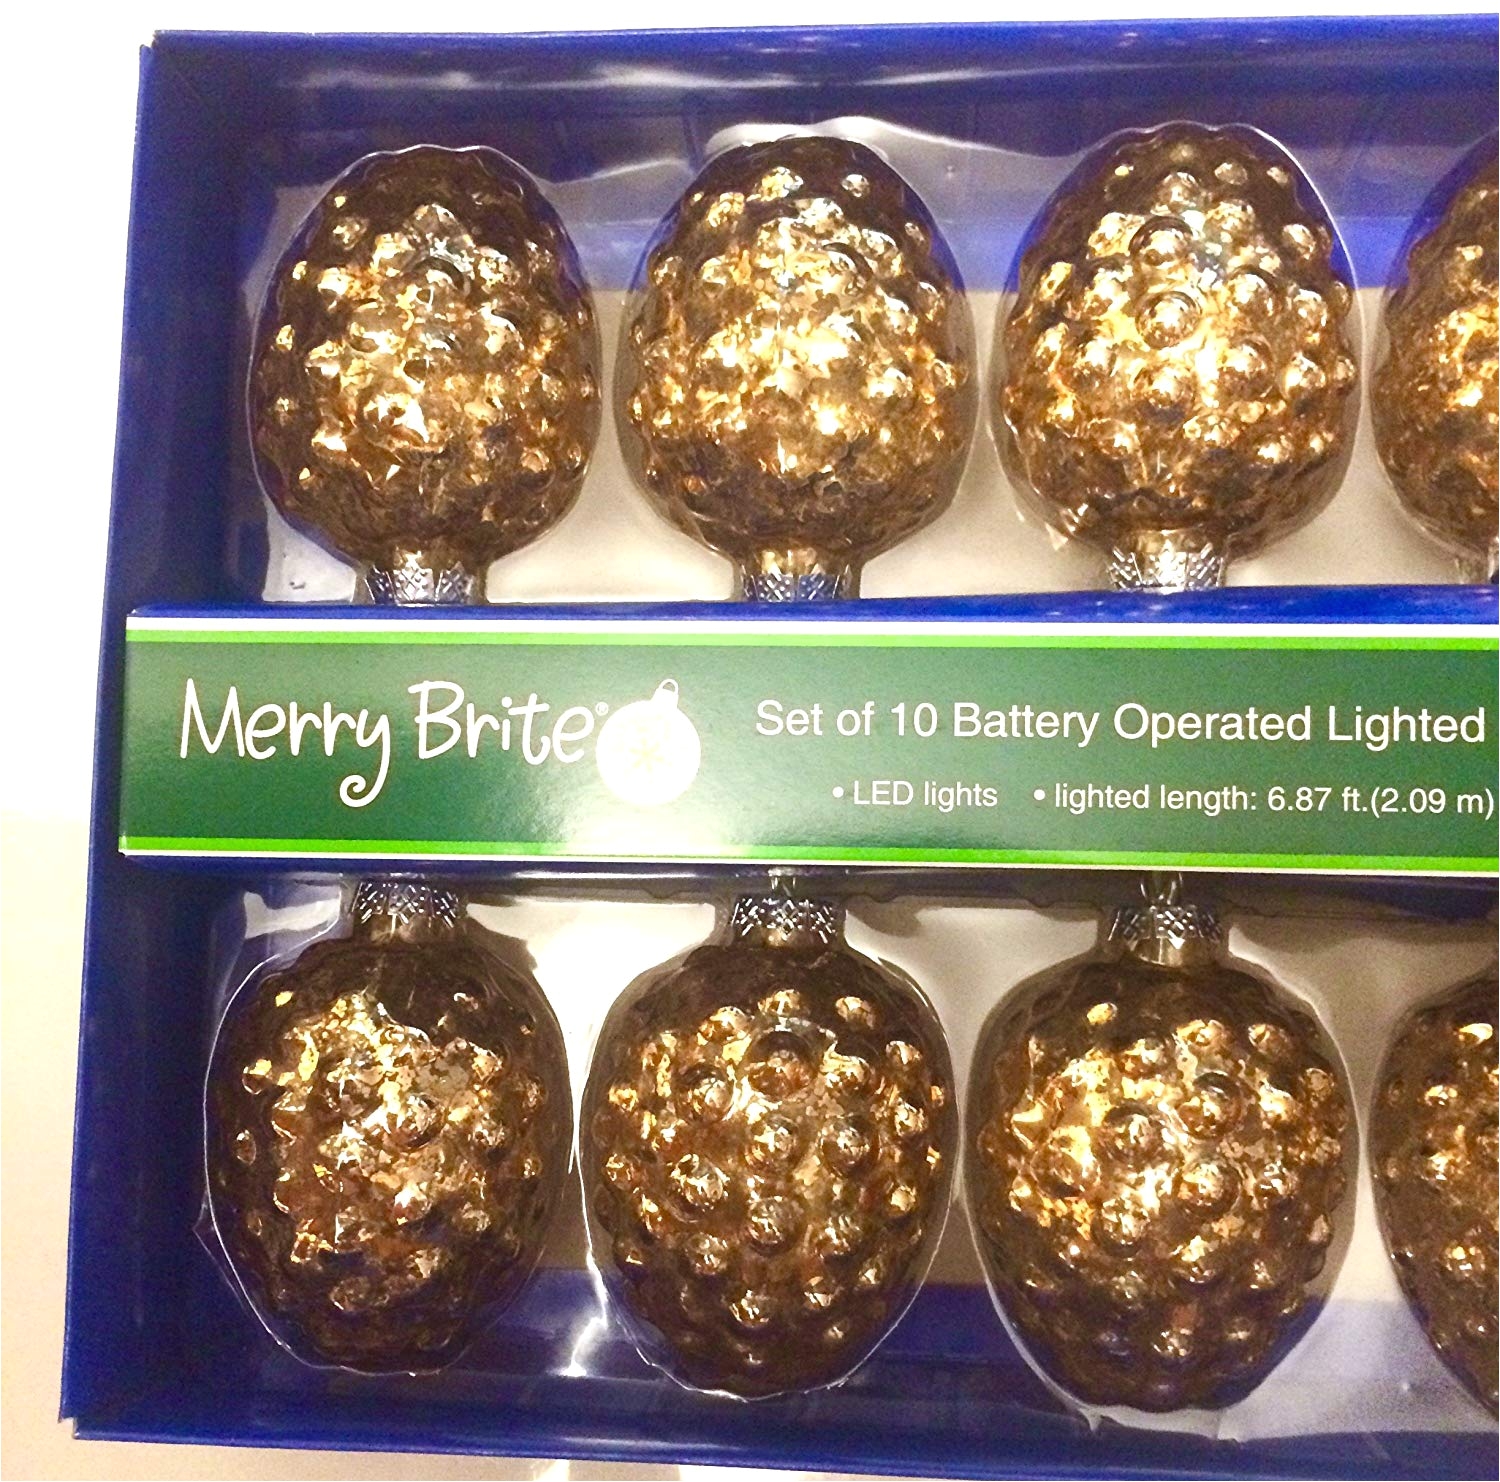 Merry Brite Lights Amazon Com Merry Brite Set Of 10 Battery Operated Lighted Glass